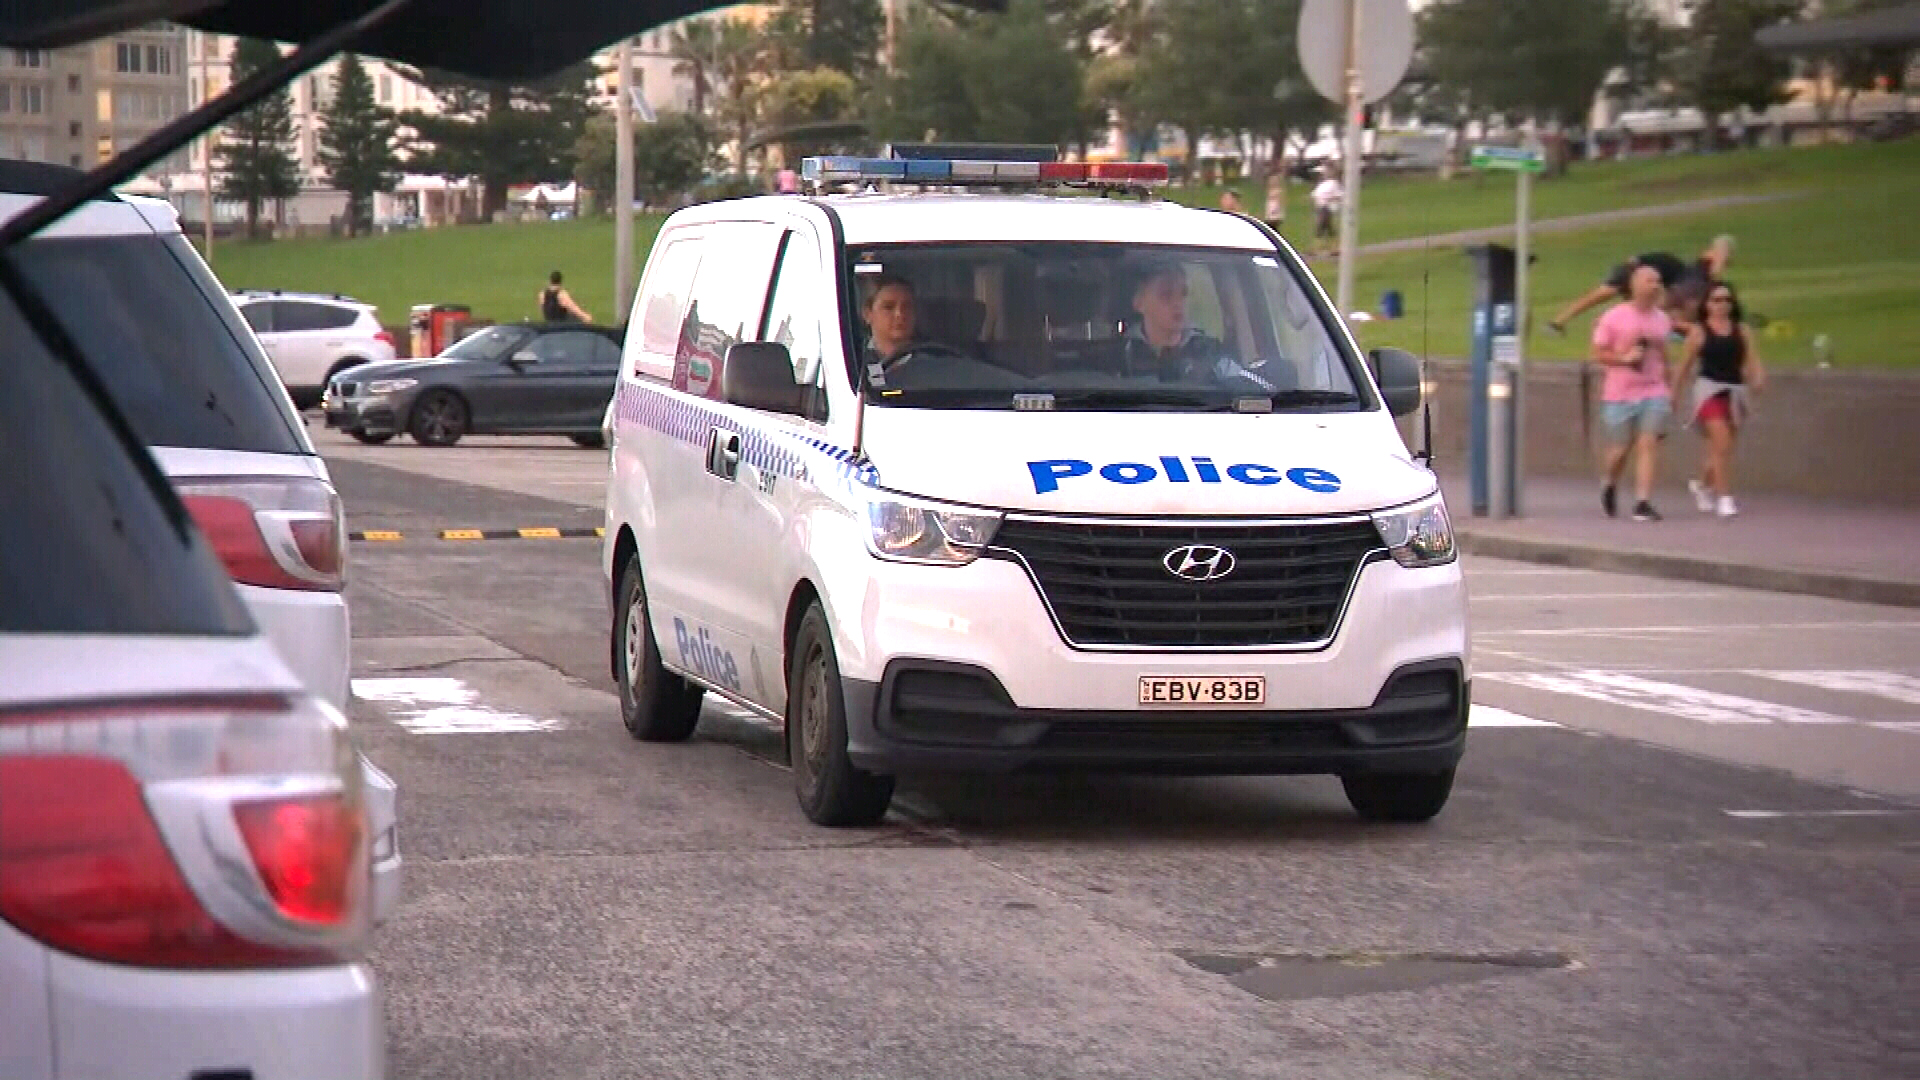 A NSW Police van drives through a Bondi Beach carpark. Around 70,000 police officers are patrolling the social distancing orders.